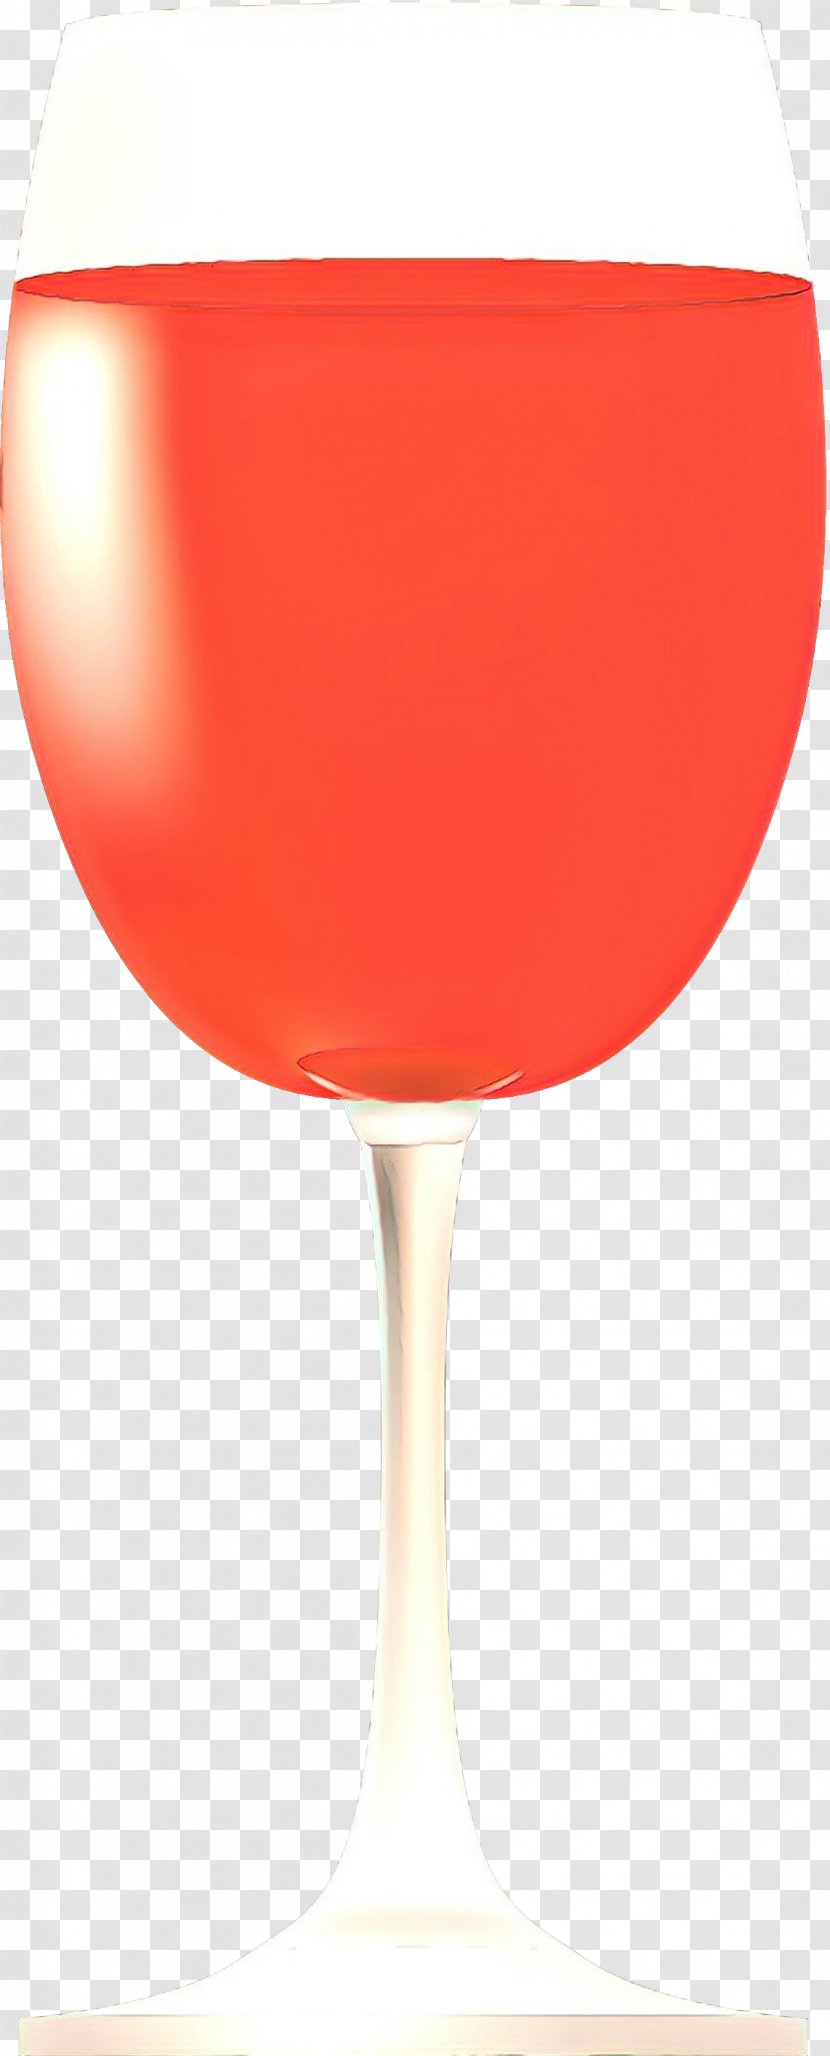 Table Background - Champagne Cocktail - Peach Kir Royale Transparent PNG